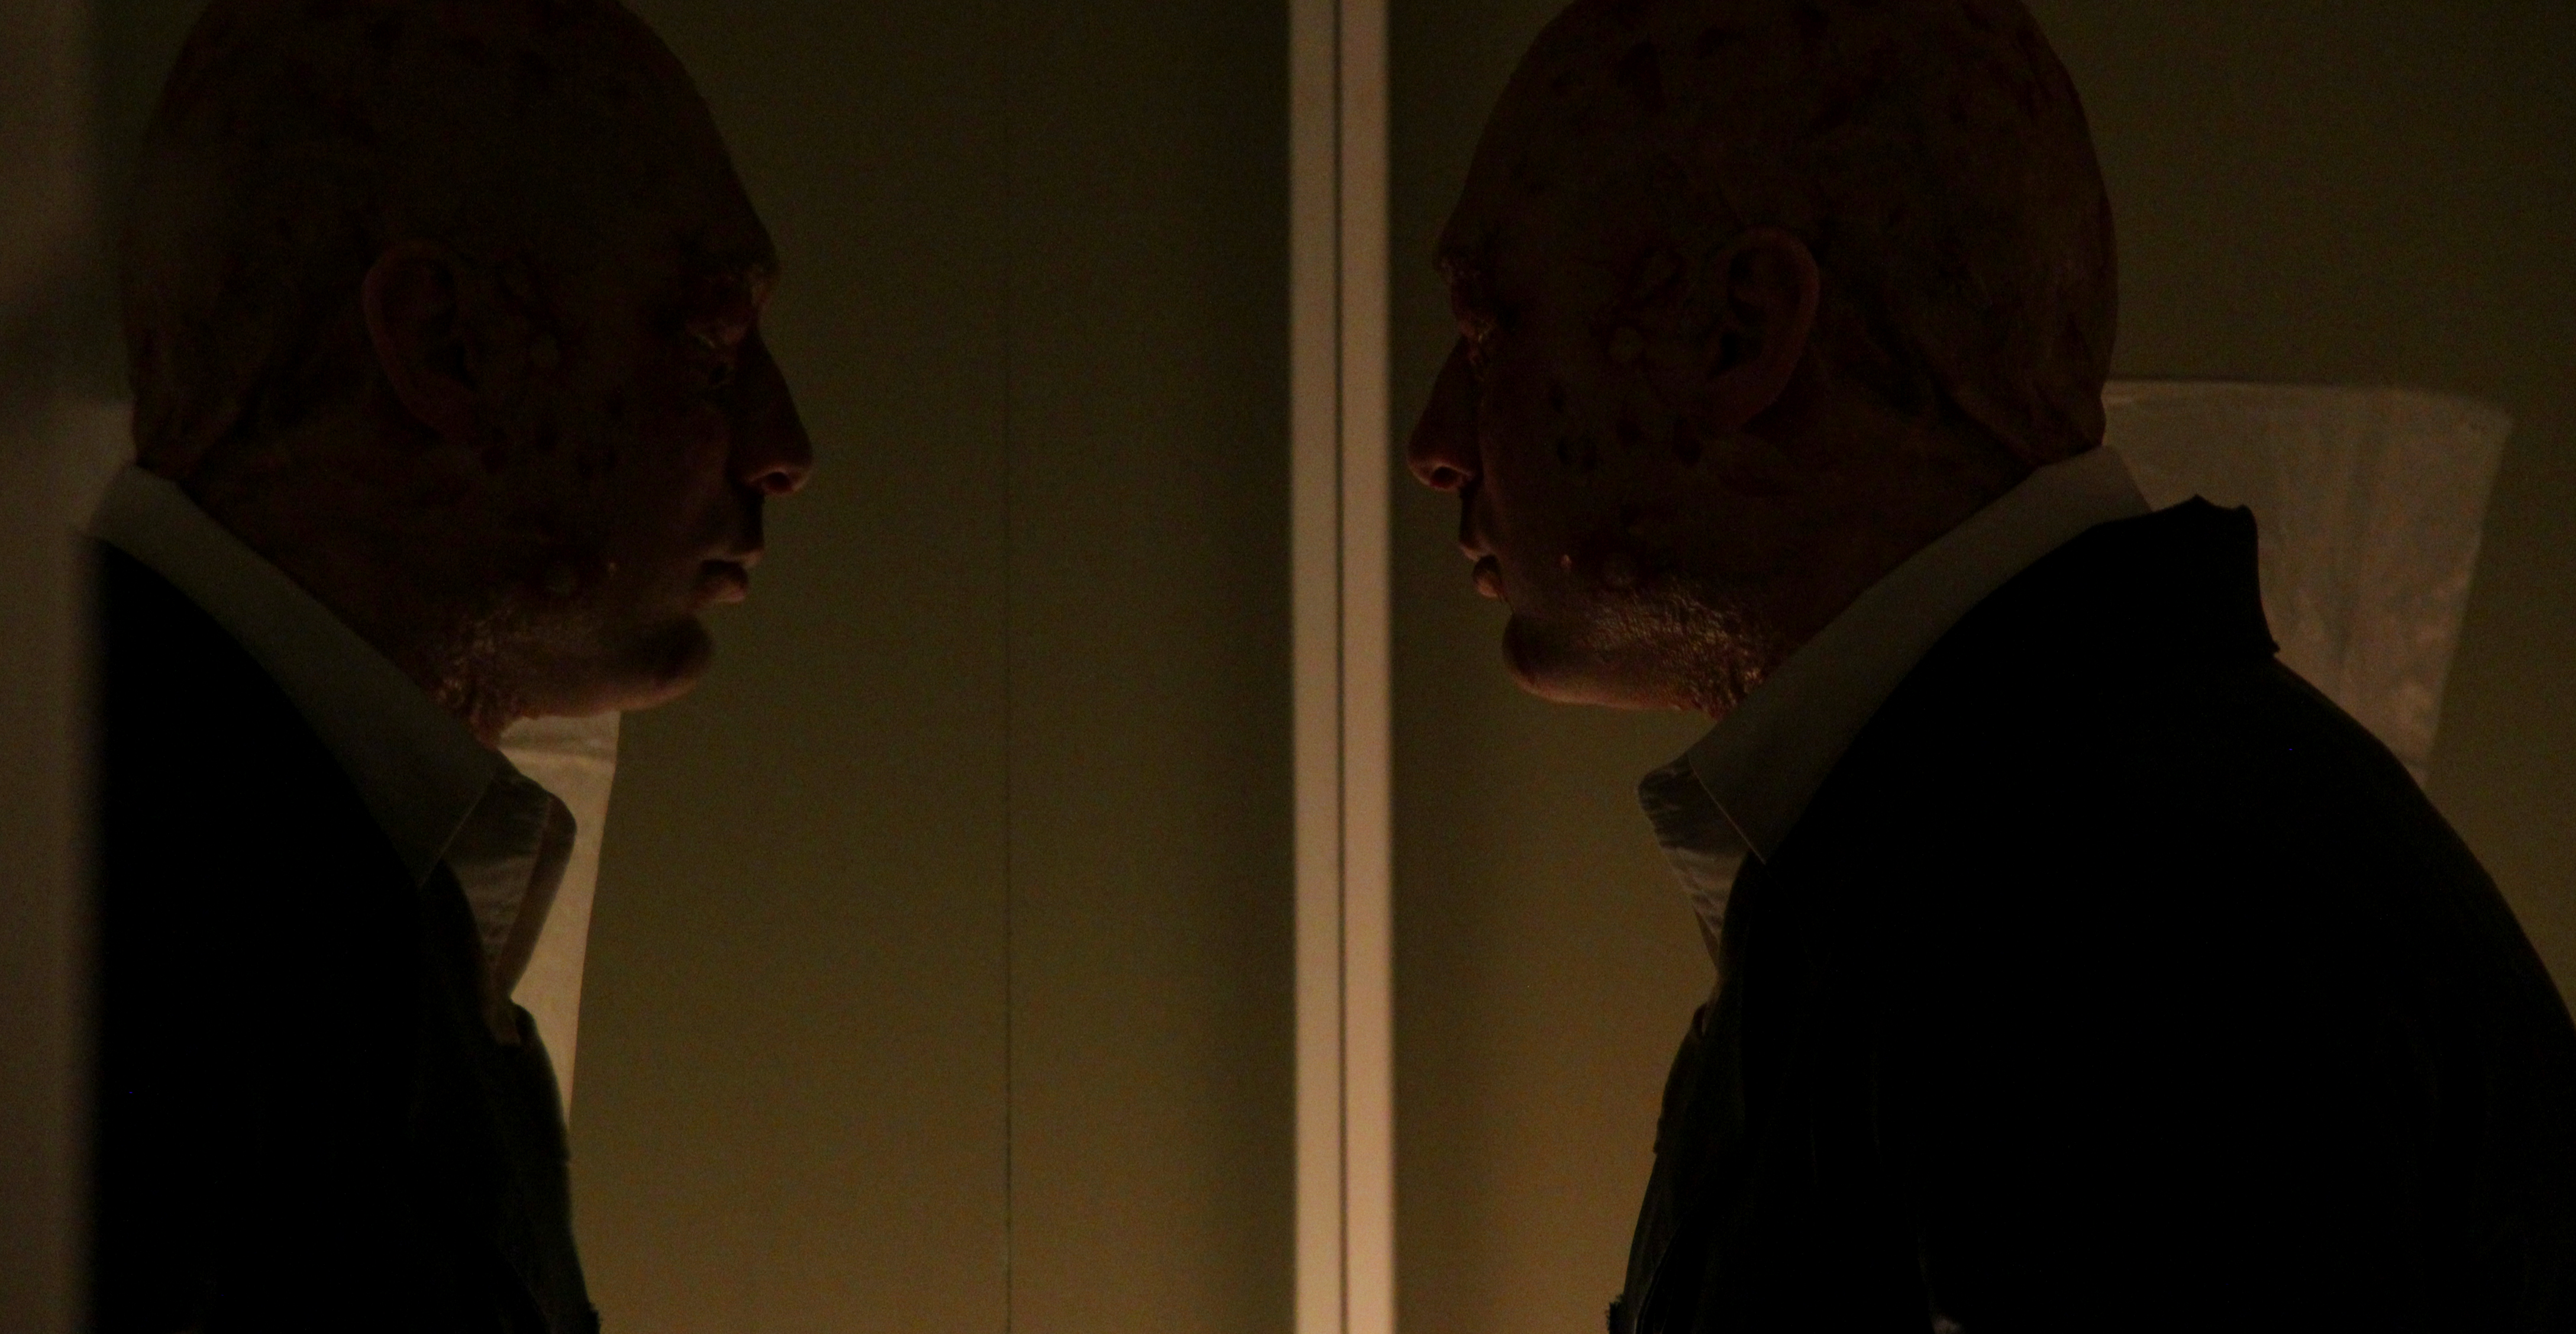 Still photography from the short film 'Firefly'. Conor Gomez playing the Villain Warfare.